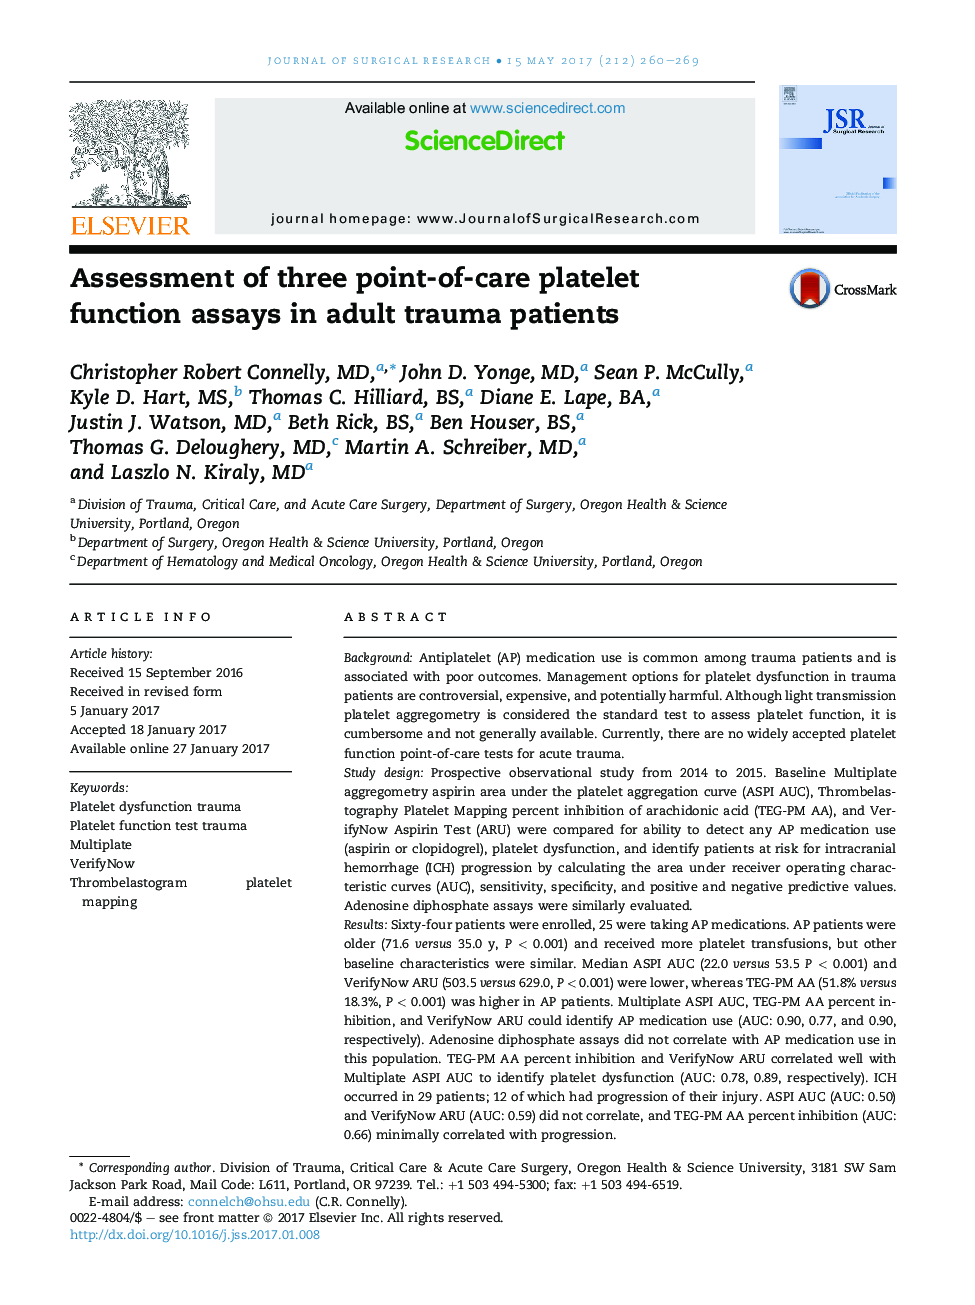 Assessment of three point-of-care platelet function assays in adult trauma patients